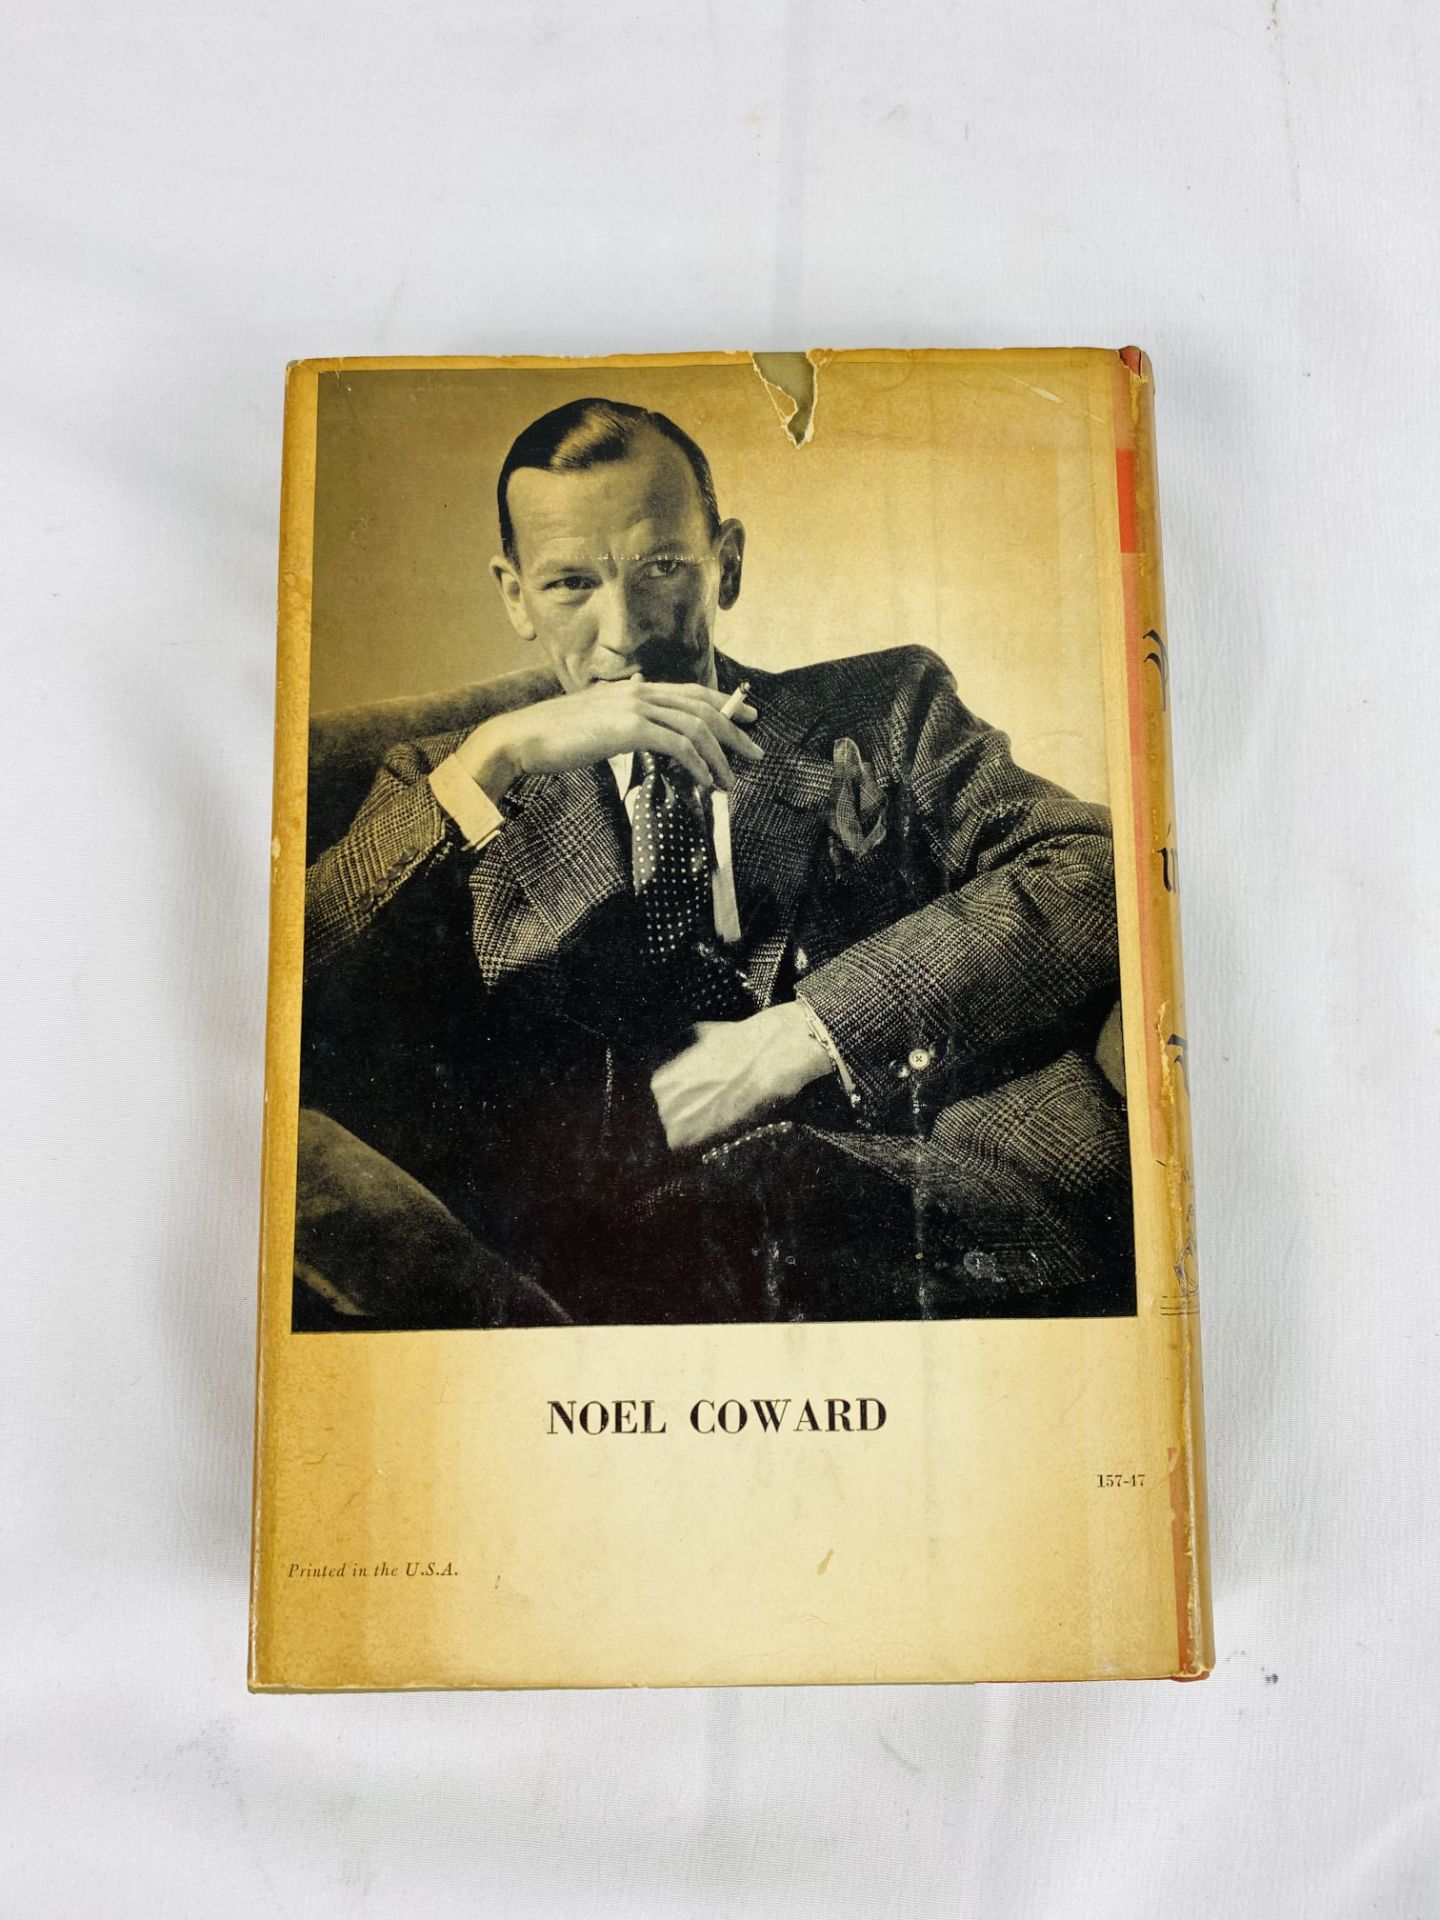 Noel Coward, Peace in our Time: A Play, published Doubleday and Company - Image 4 of 4